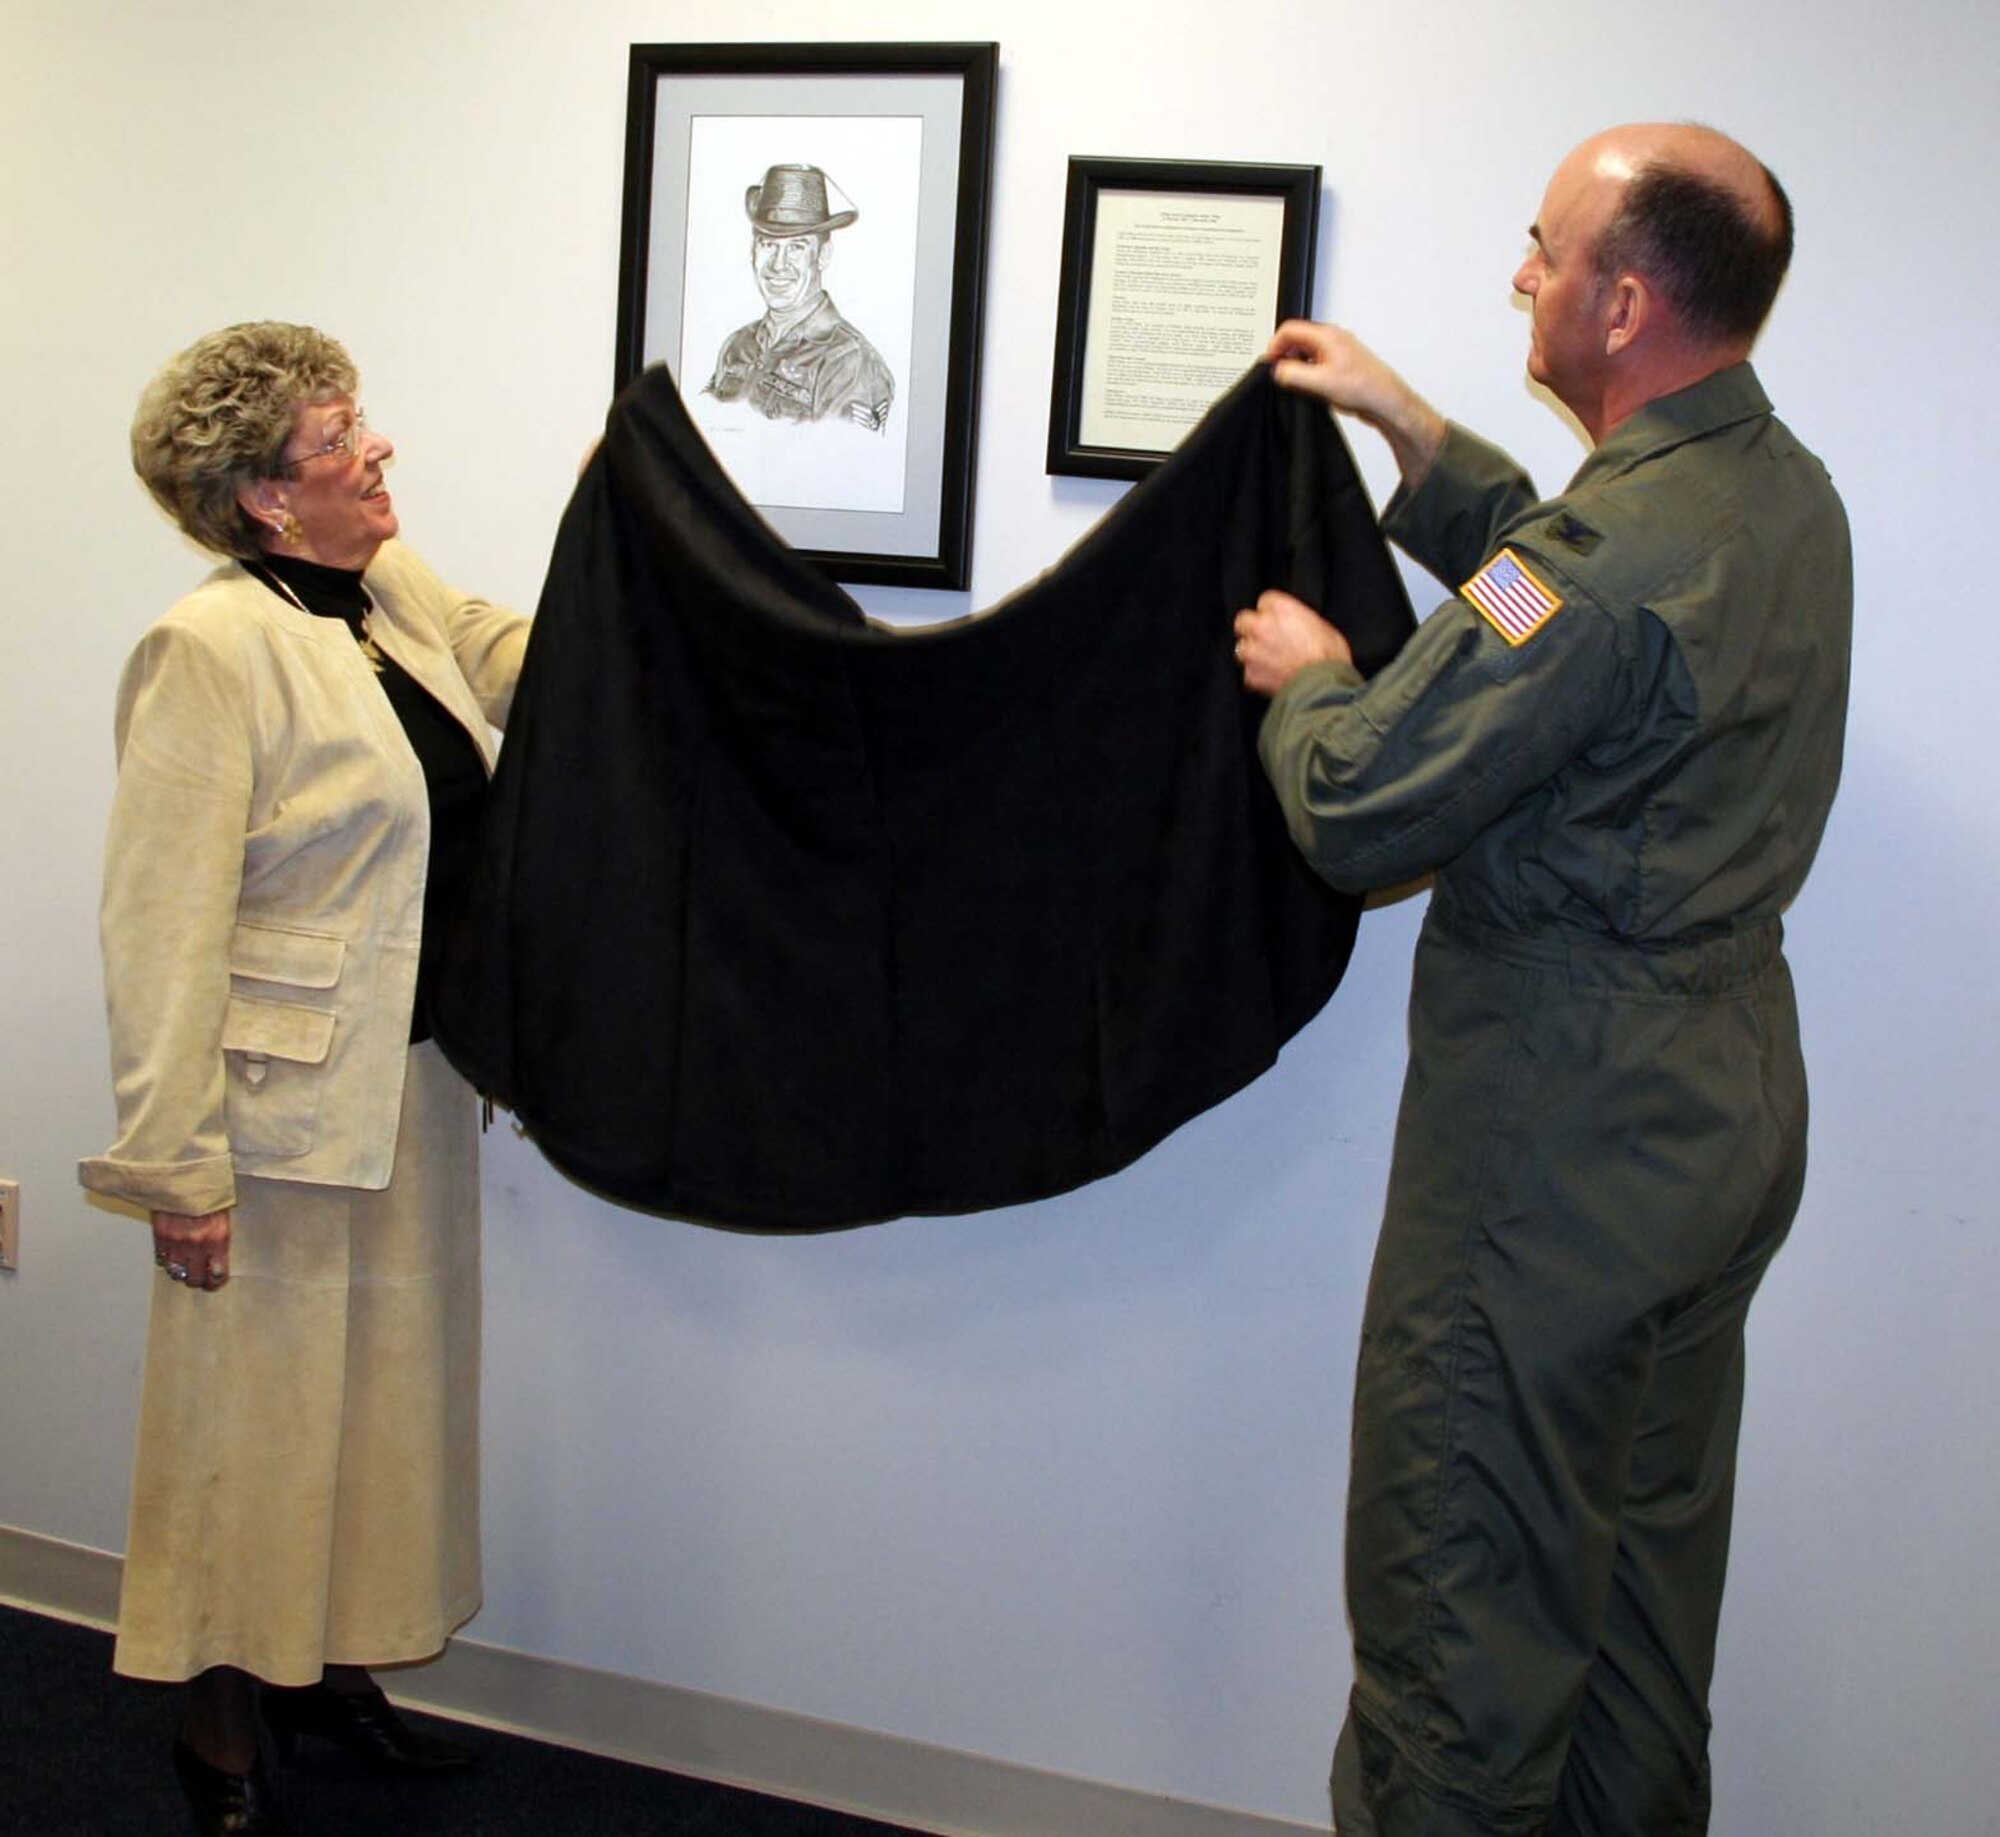 Linda Wiley helps Col. Michael Callan, Air Force Special Operations Forces commander, unveil the drawing of her husband during the dedication ceremony of the AFSOF conference room to Chief Master Sgt. Atwell Livingston "Duke" Wiley Tuesday. (U.S. Air Force photo by Jamie Haig)